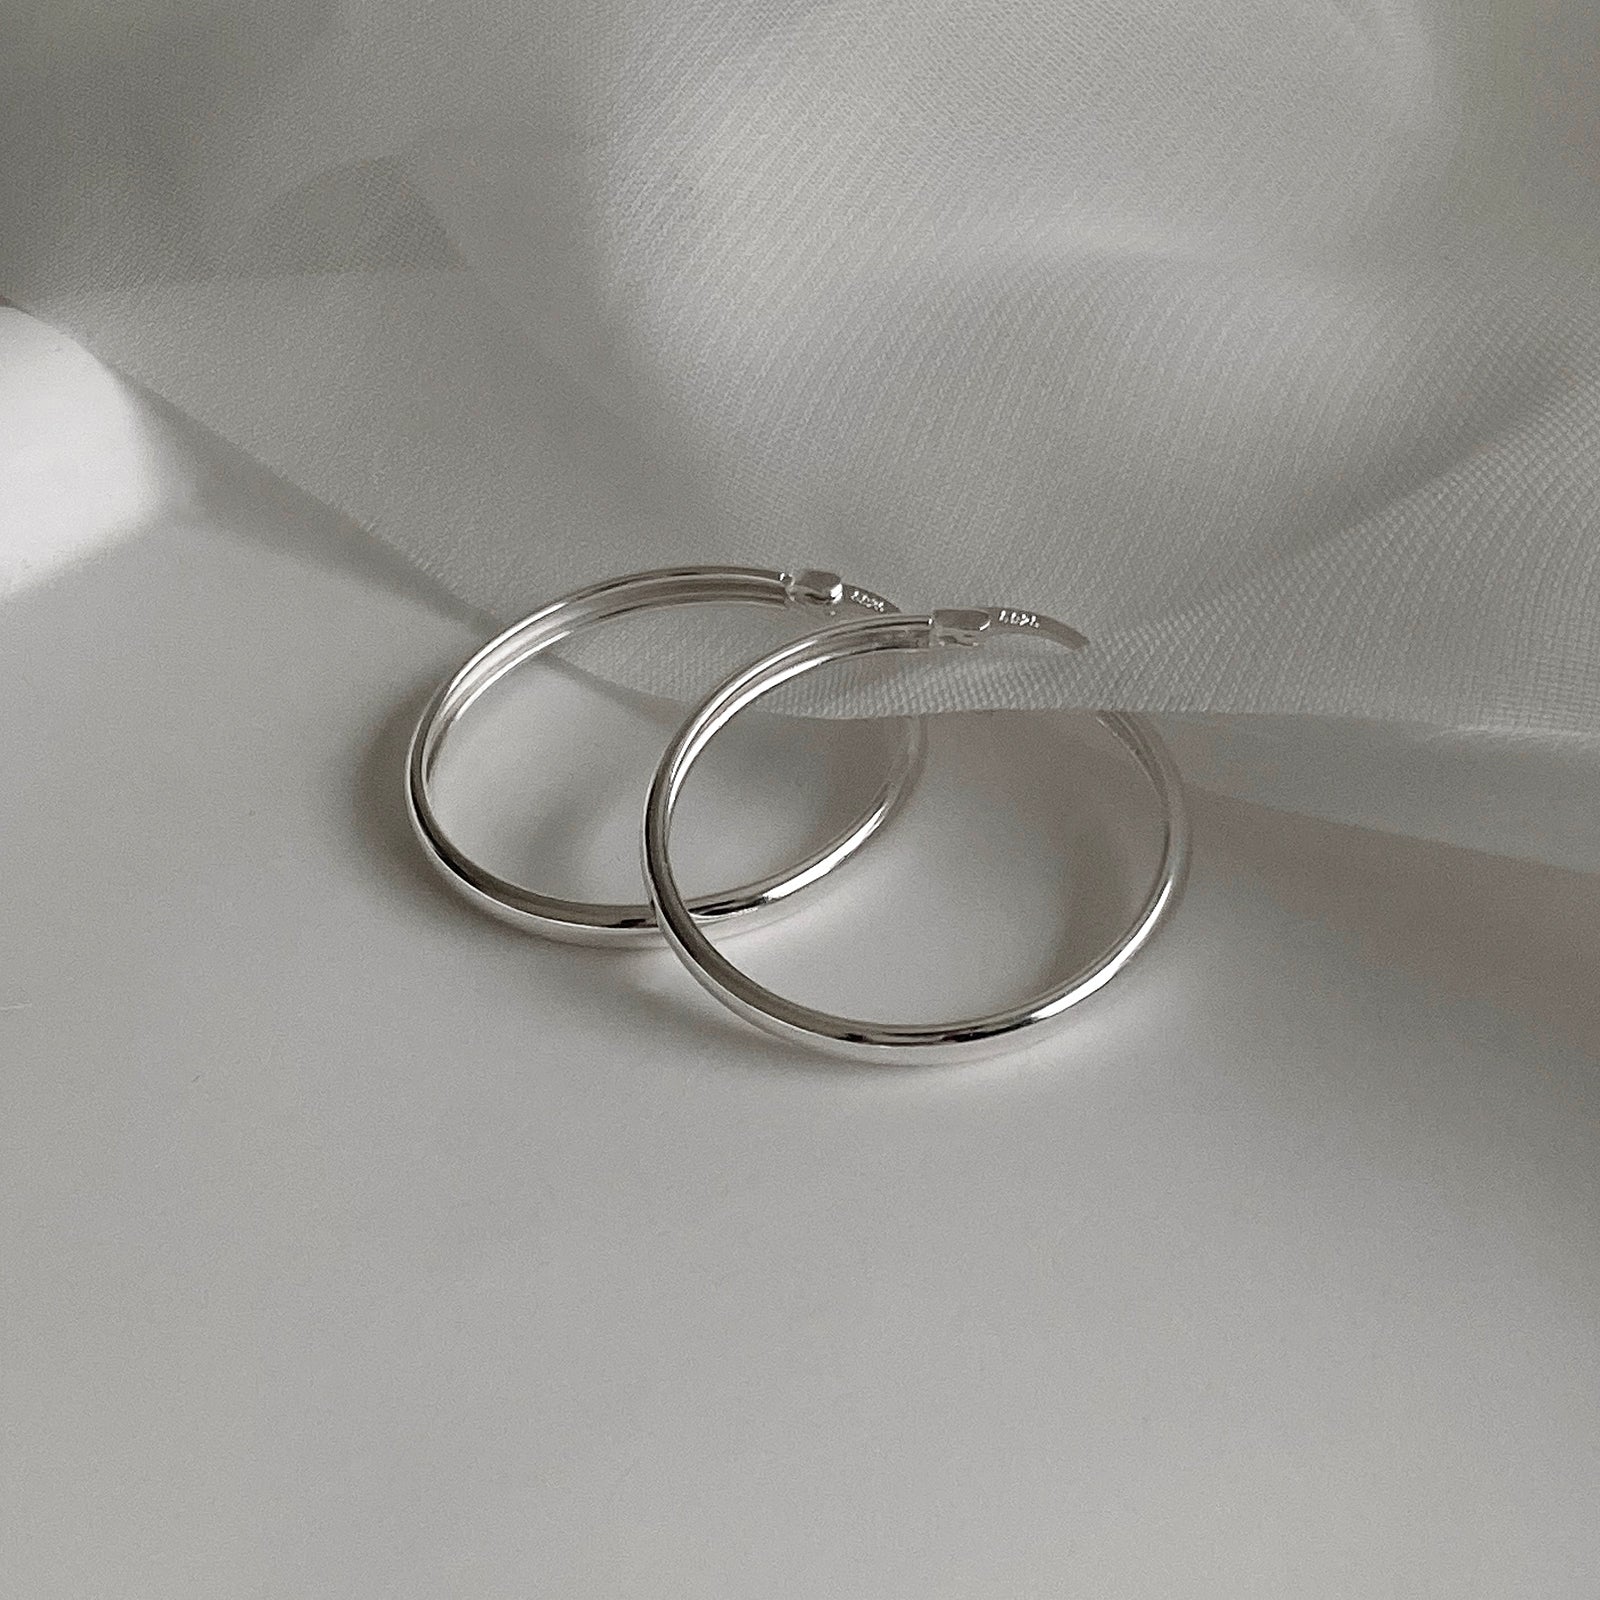 Detail View of Jane Hoops size 30mm. These are classic hoop earrings with a latch back for closure. Has a S925 stamp on the latch. These hoop earrings are made of 925 Sterling Silver and has a smooth and shiny finish.